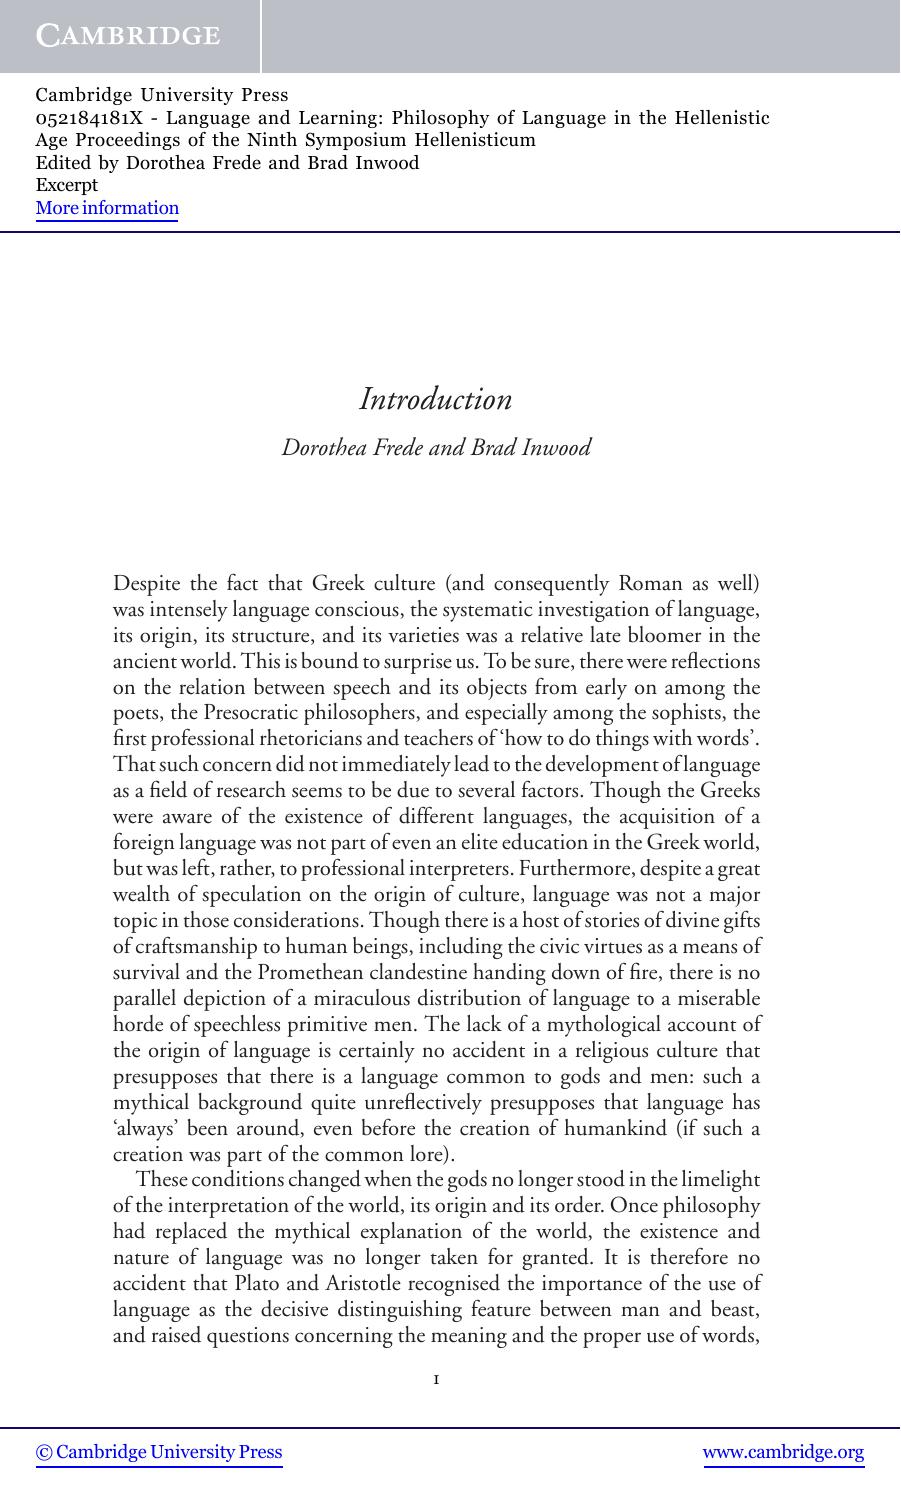 Language and Learning: Philosophy of Language in the Hellenistic Age - Excerpt